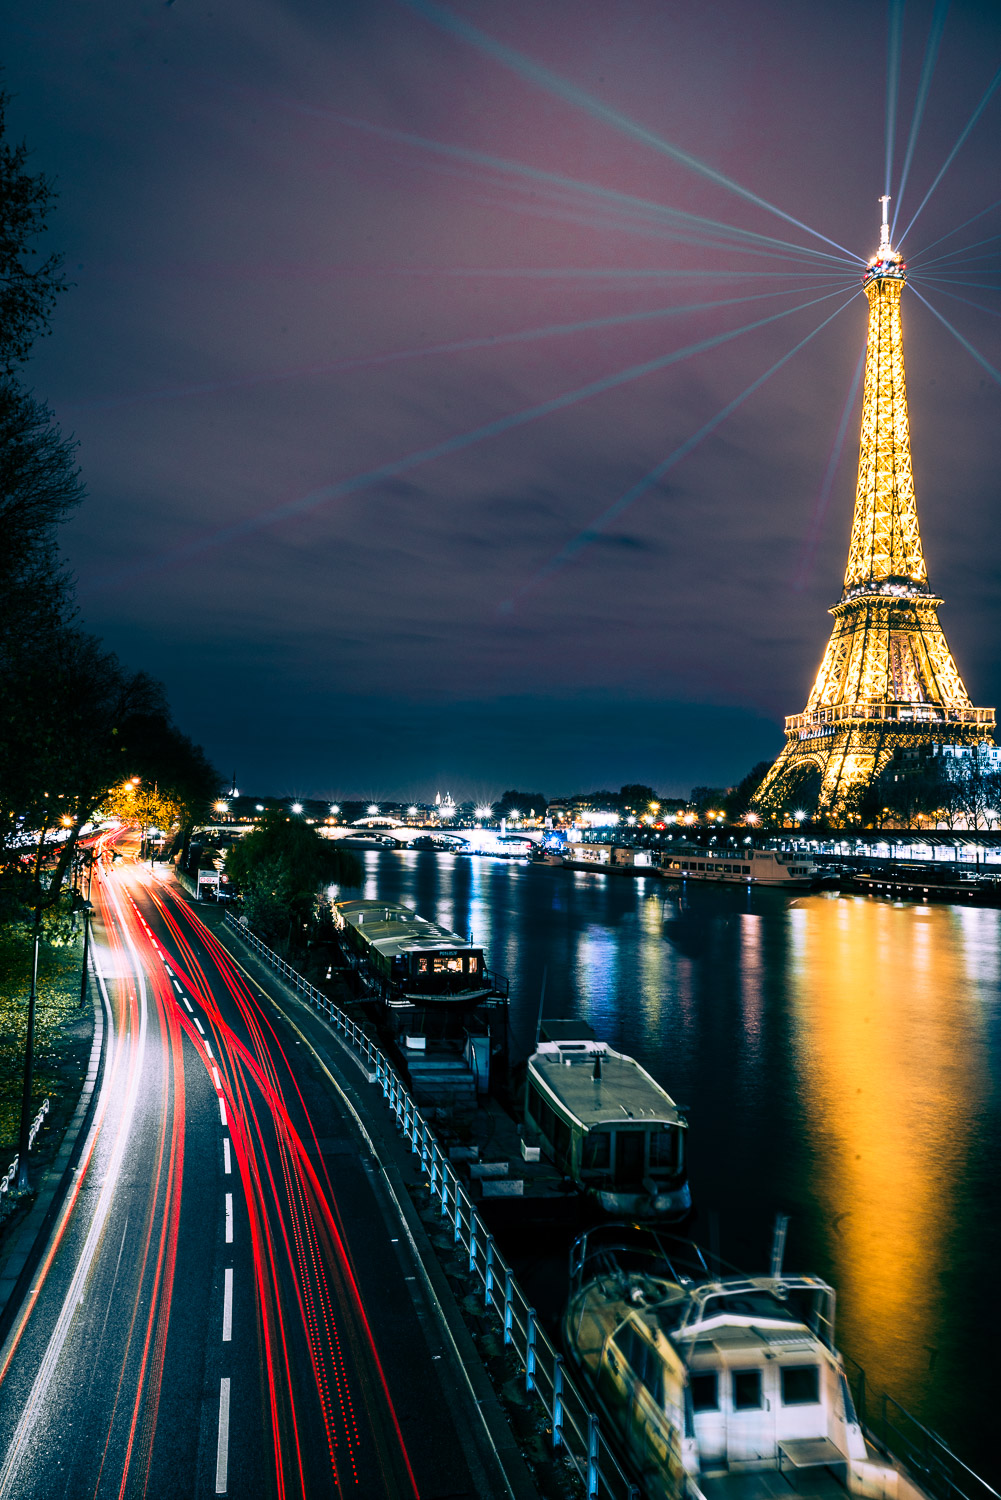 Streaks and Beams - Eiffel Tower, Europe, France, Paris, Seine, boat, boats, cars, lights, long exposure, night, river